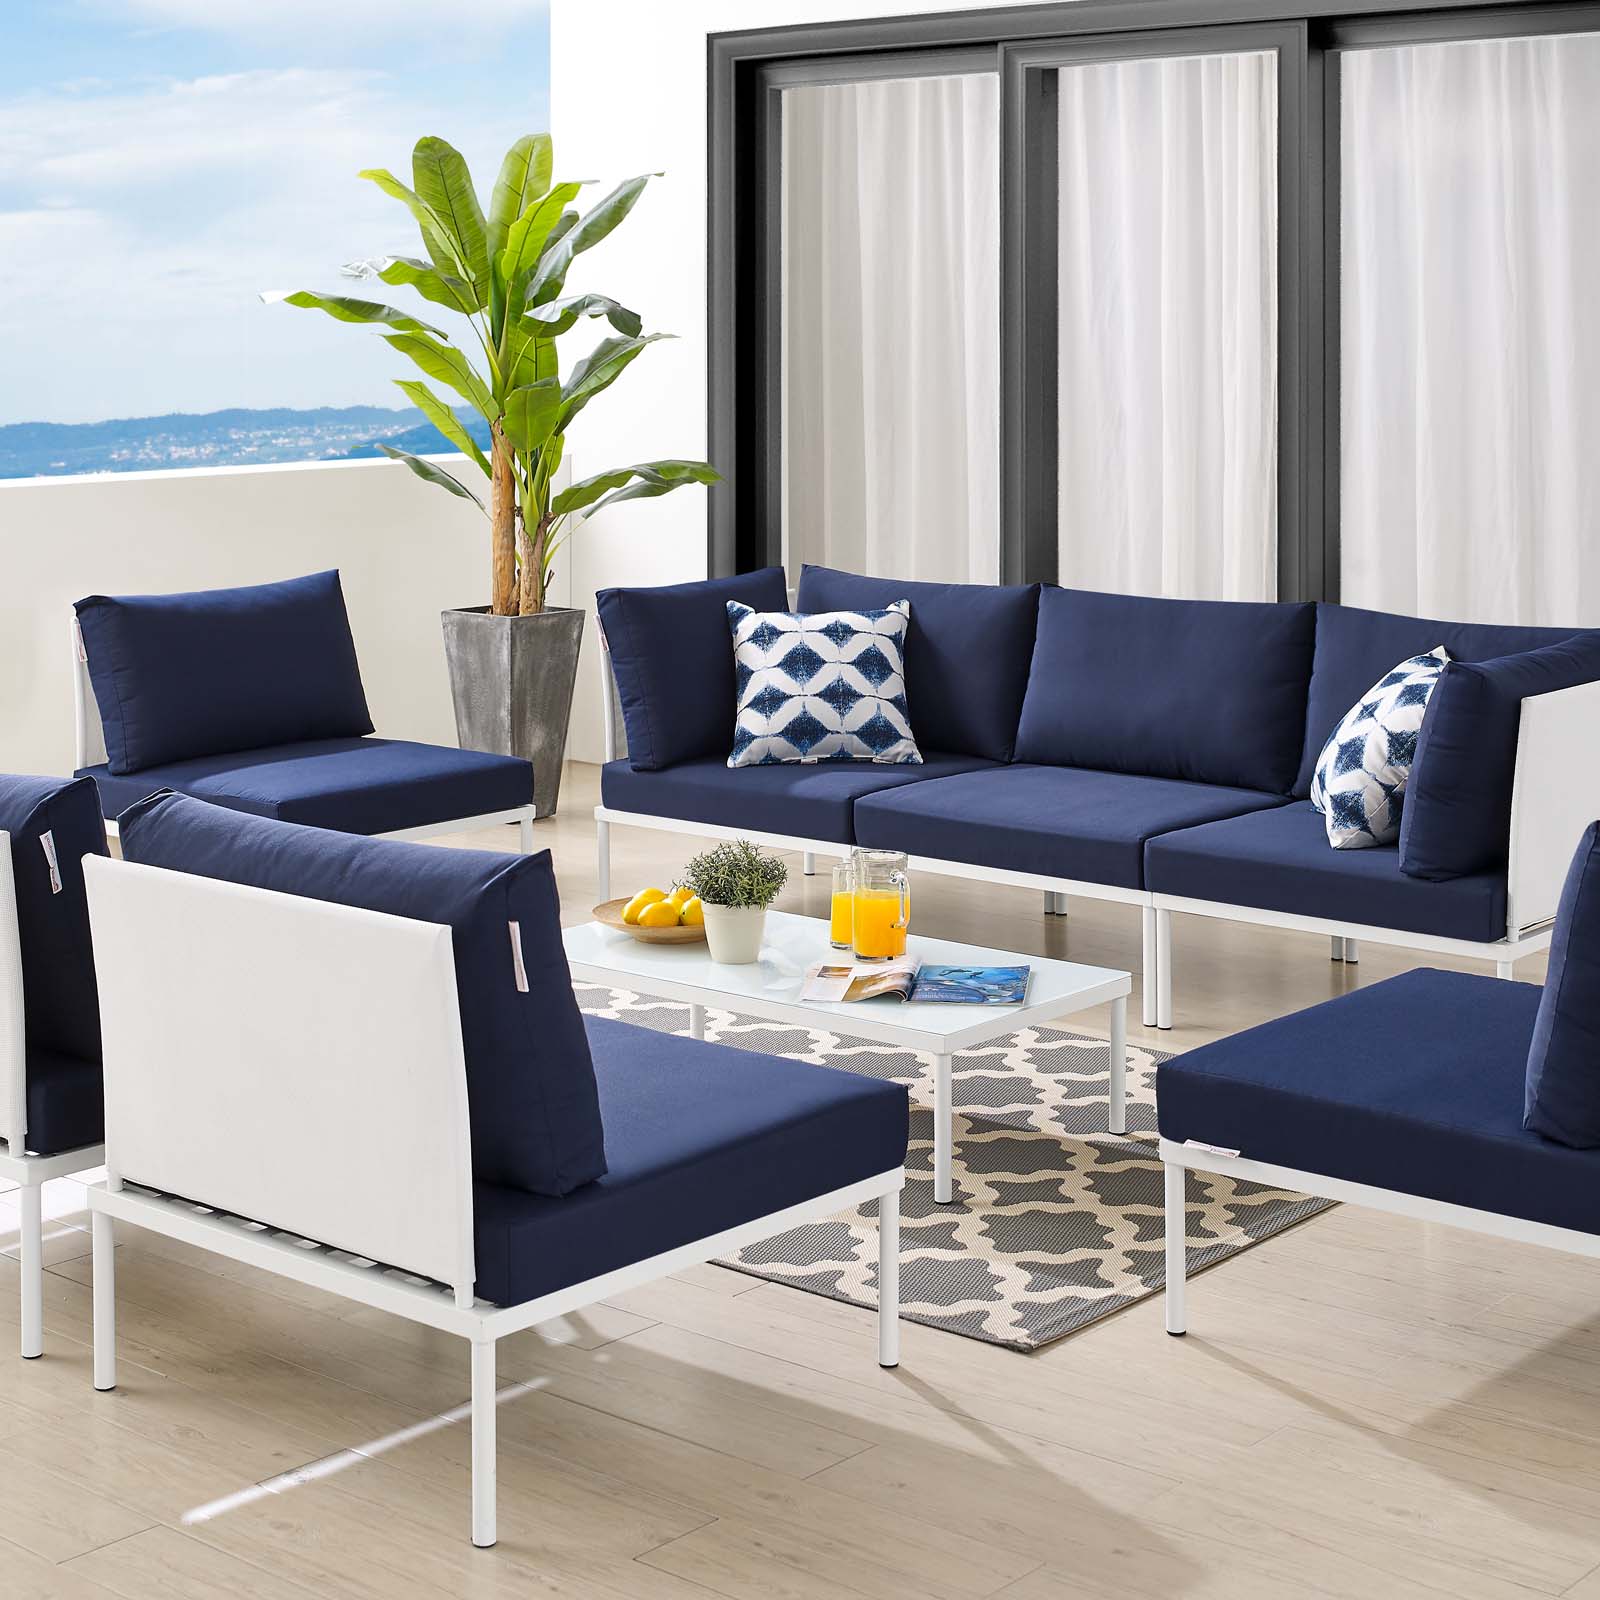 Lounge Sectional Sofa Chair Table Set, Sunbrella, Aluminum, Metal, Steel, White Blue Navy, Modern Contemporary Urban Design, Outdoor Patio Balcony Cafe Bistro Garden Furniture Hotel Hospitality - image 5 of 10